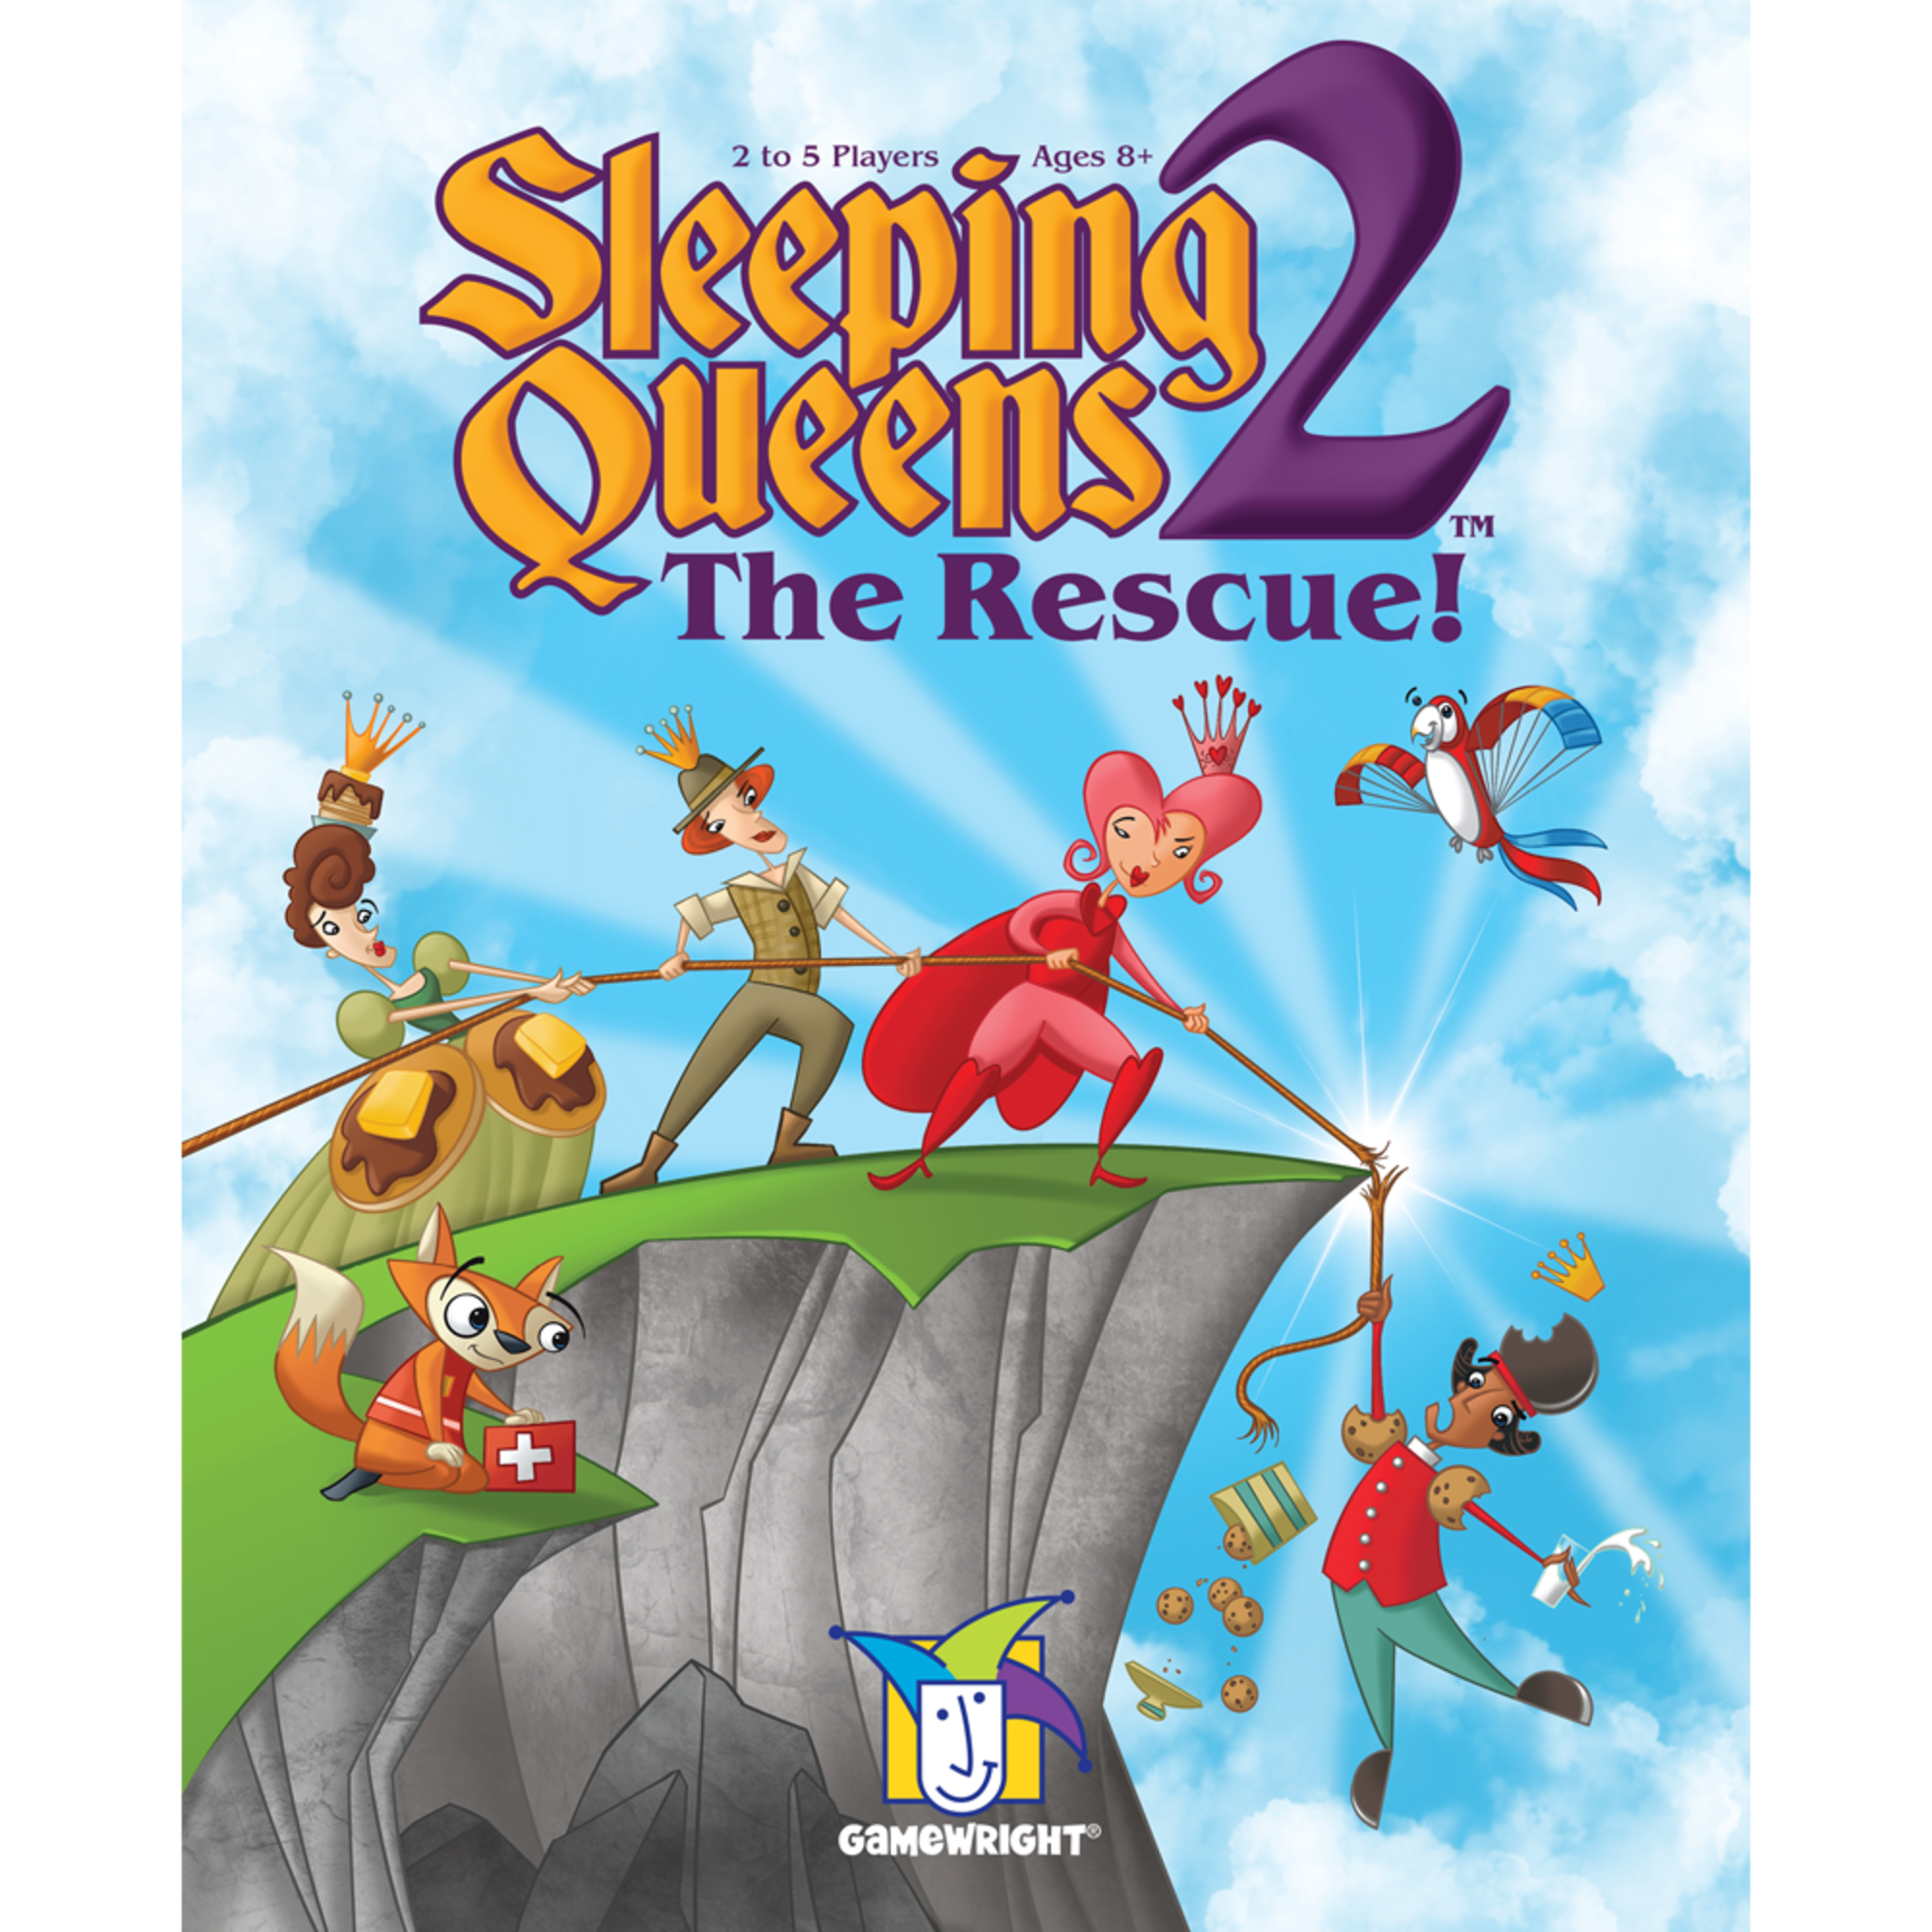 Sleeping Queens 2, The Rescue! by Gamewright #122